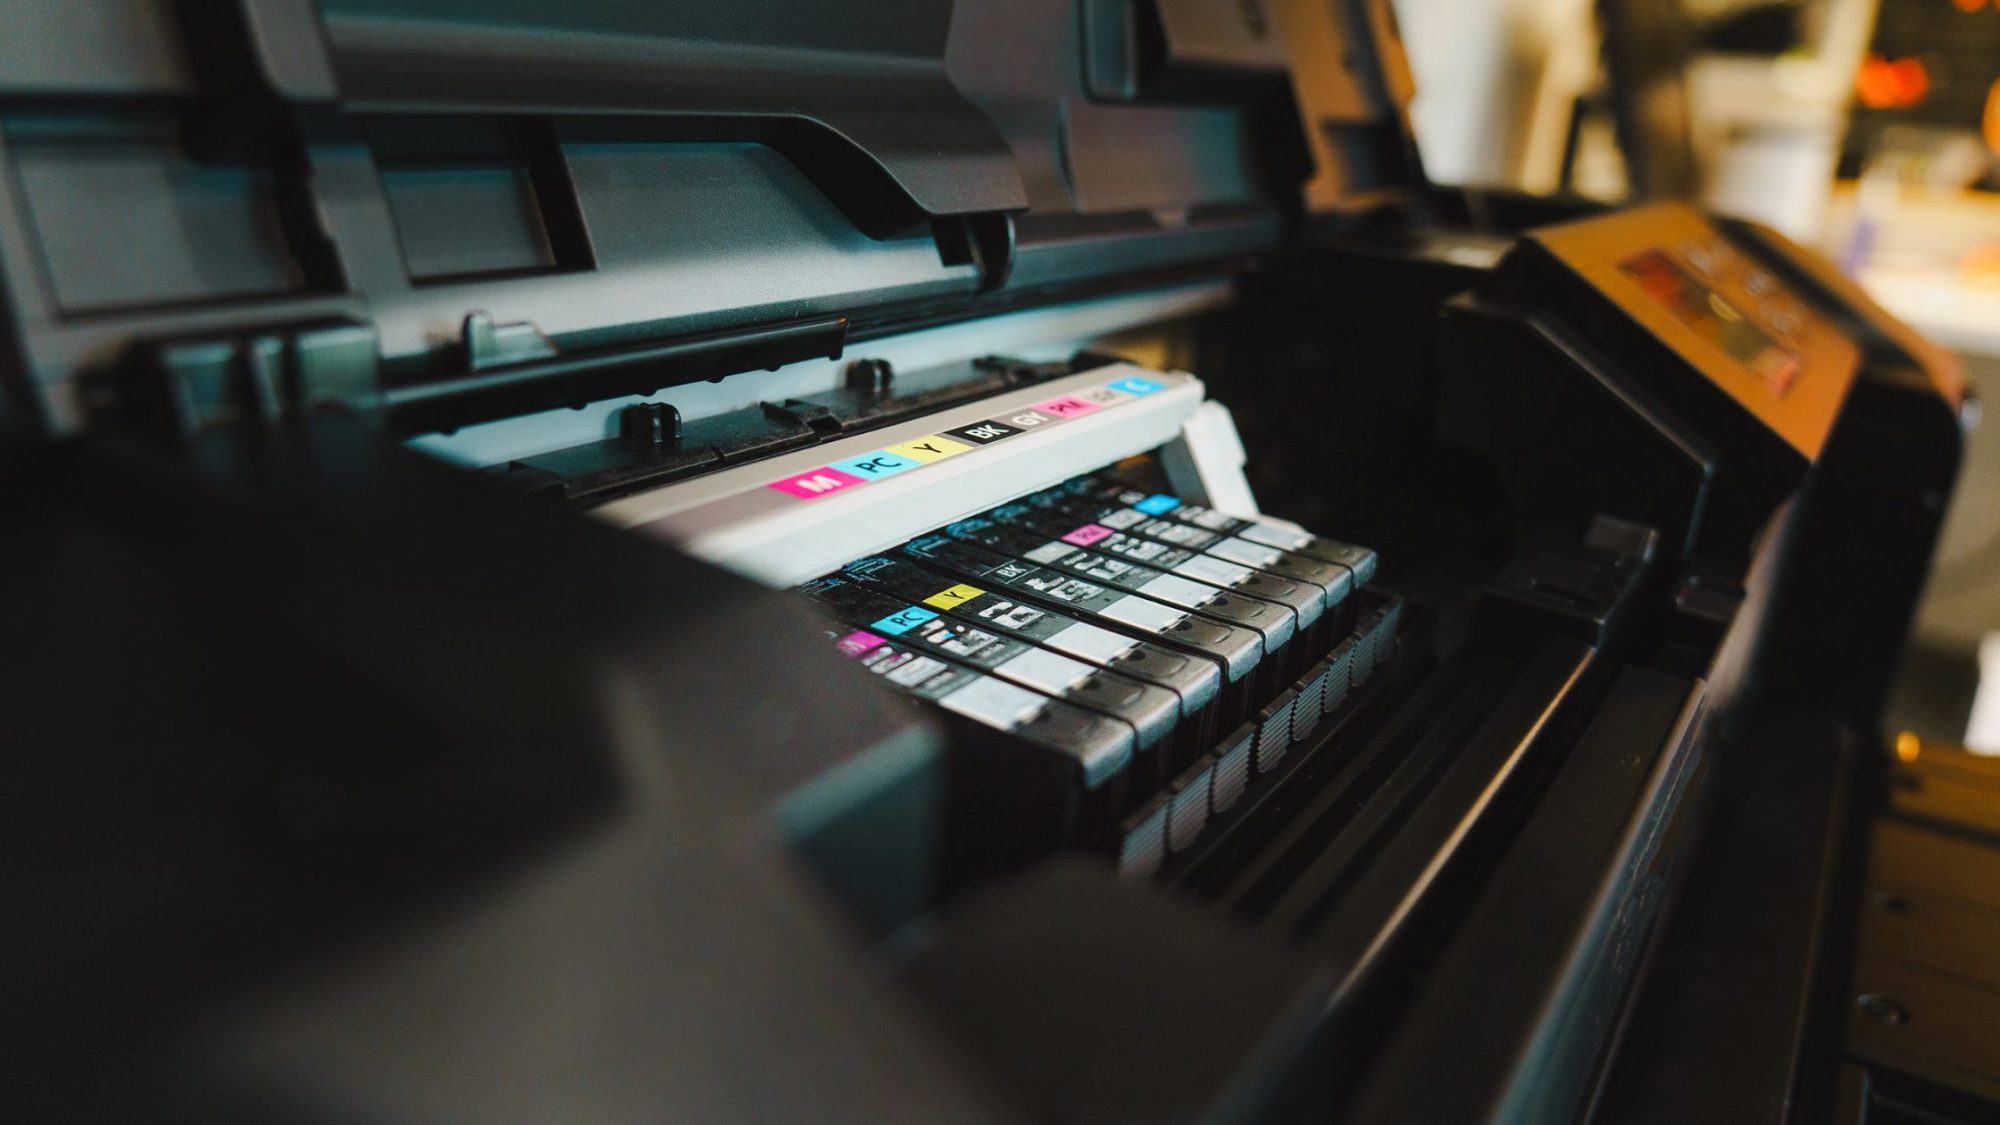 Close-up of an open printer with visible ink cartridges in various colors, including magenta, yellow, cyan, and black.